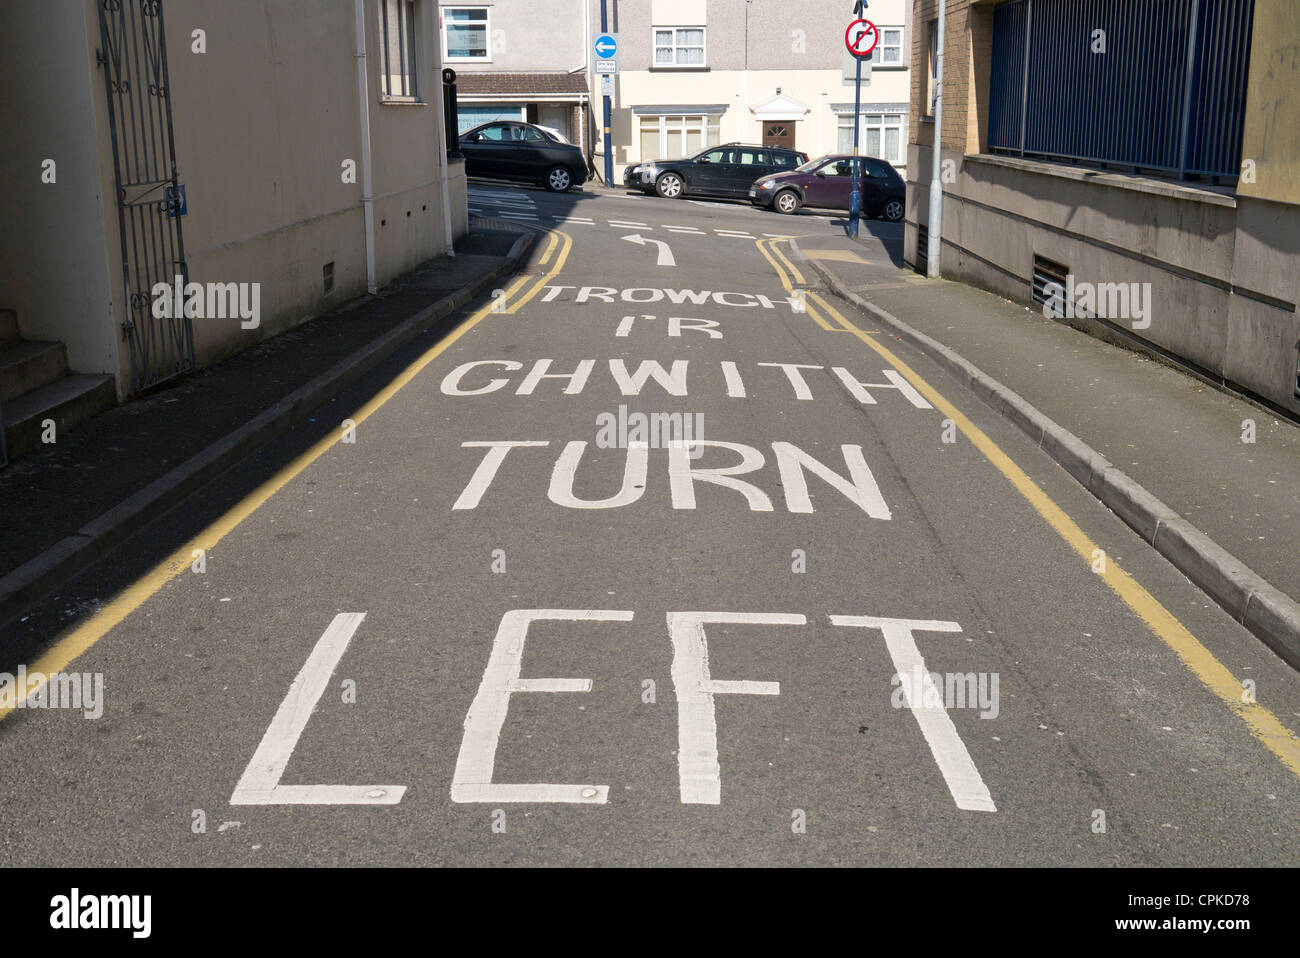 Trowch I'r Chwith, girare a sinistra in segno gallese e inglese. Swansea Wales UK. Foto Stock